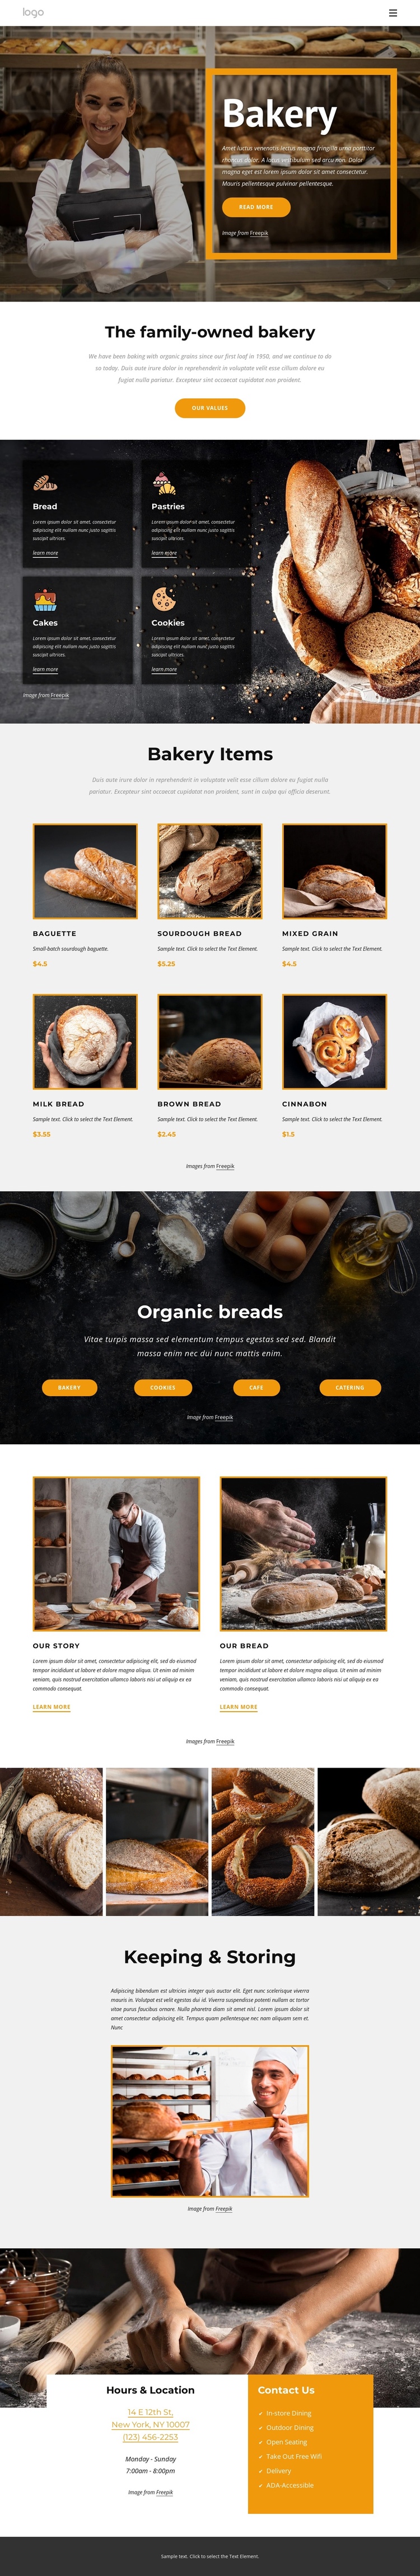 The family-owned bakery One Page Template